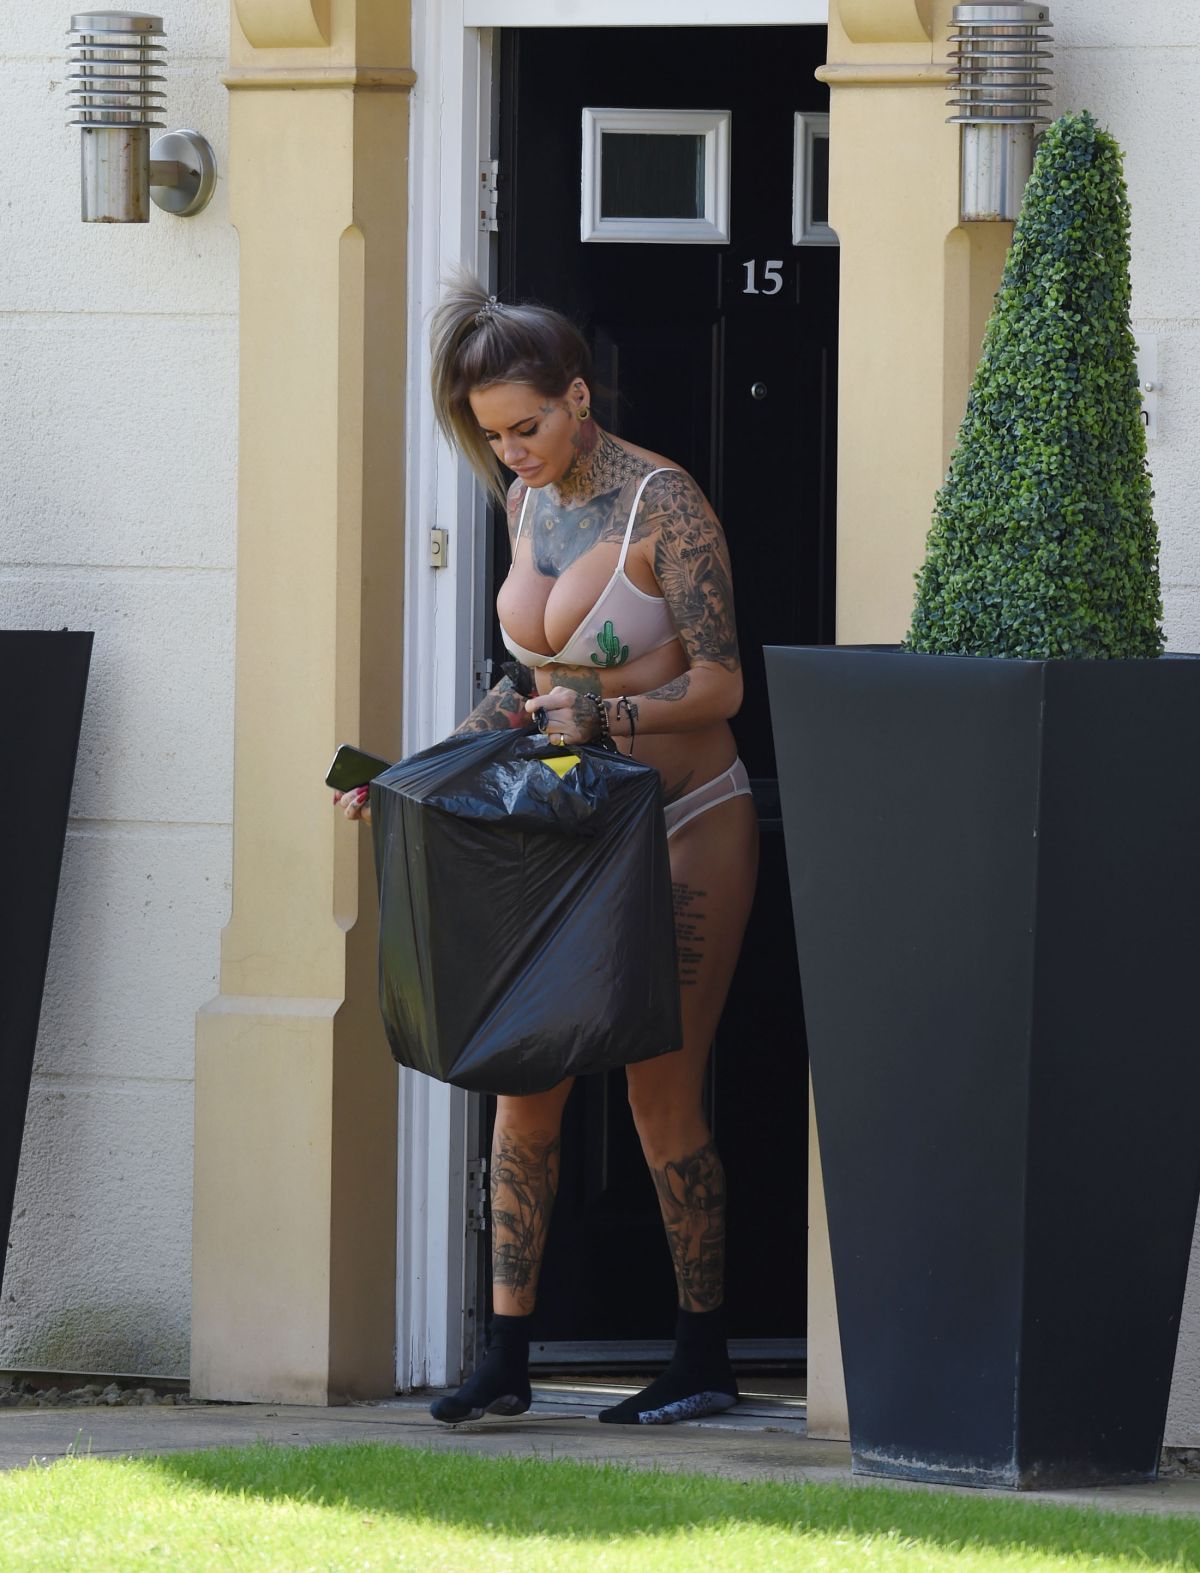 jemma-lucy-putting-out-rubbish-08-21-2016_14.jpg